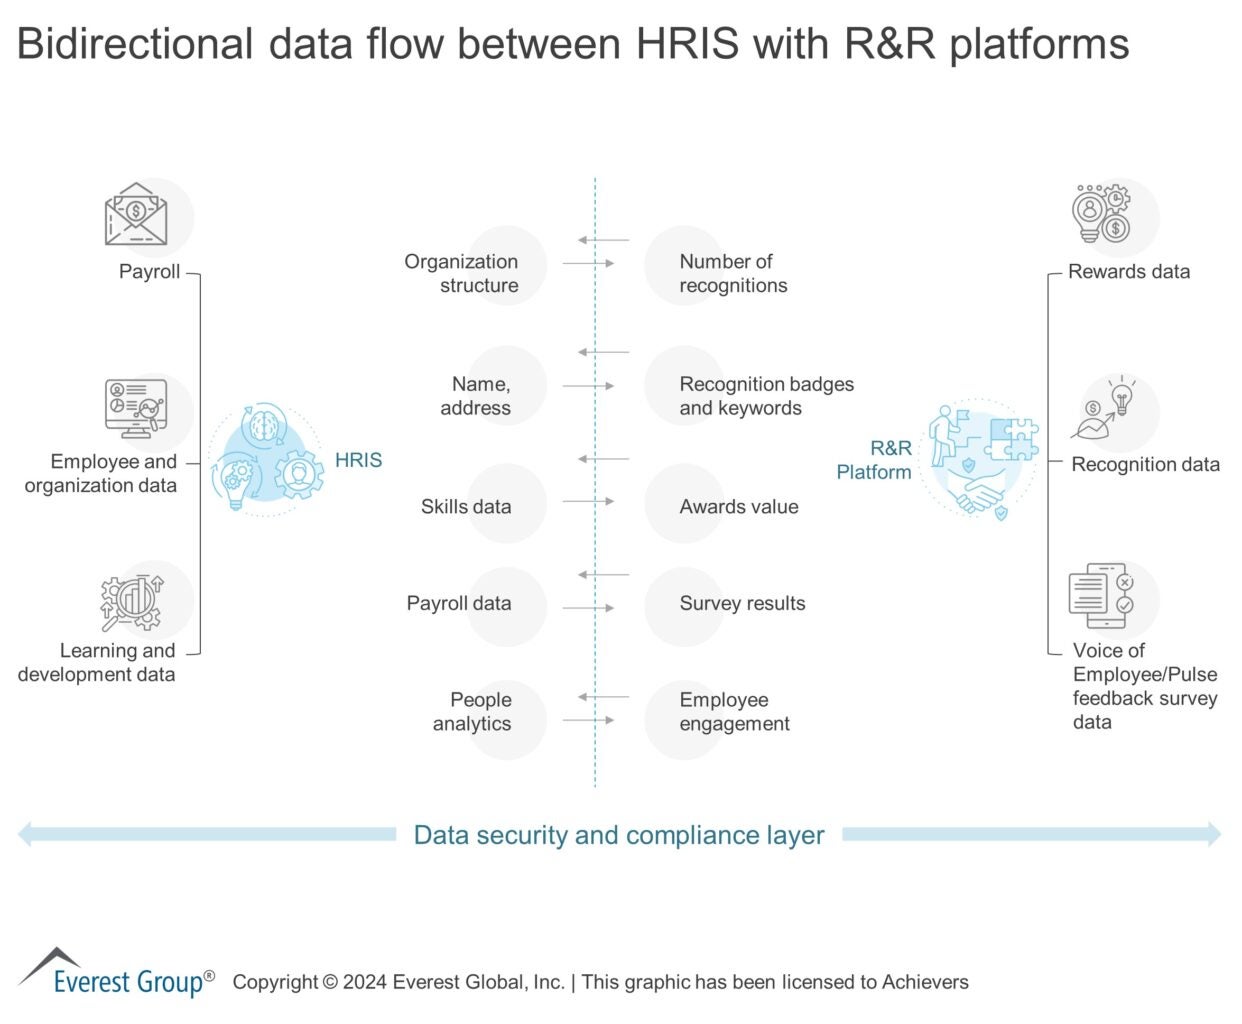 Chart showing bidirectional data flow between recognition and HRIS platforms